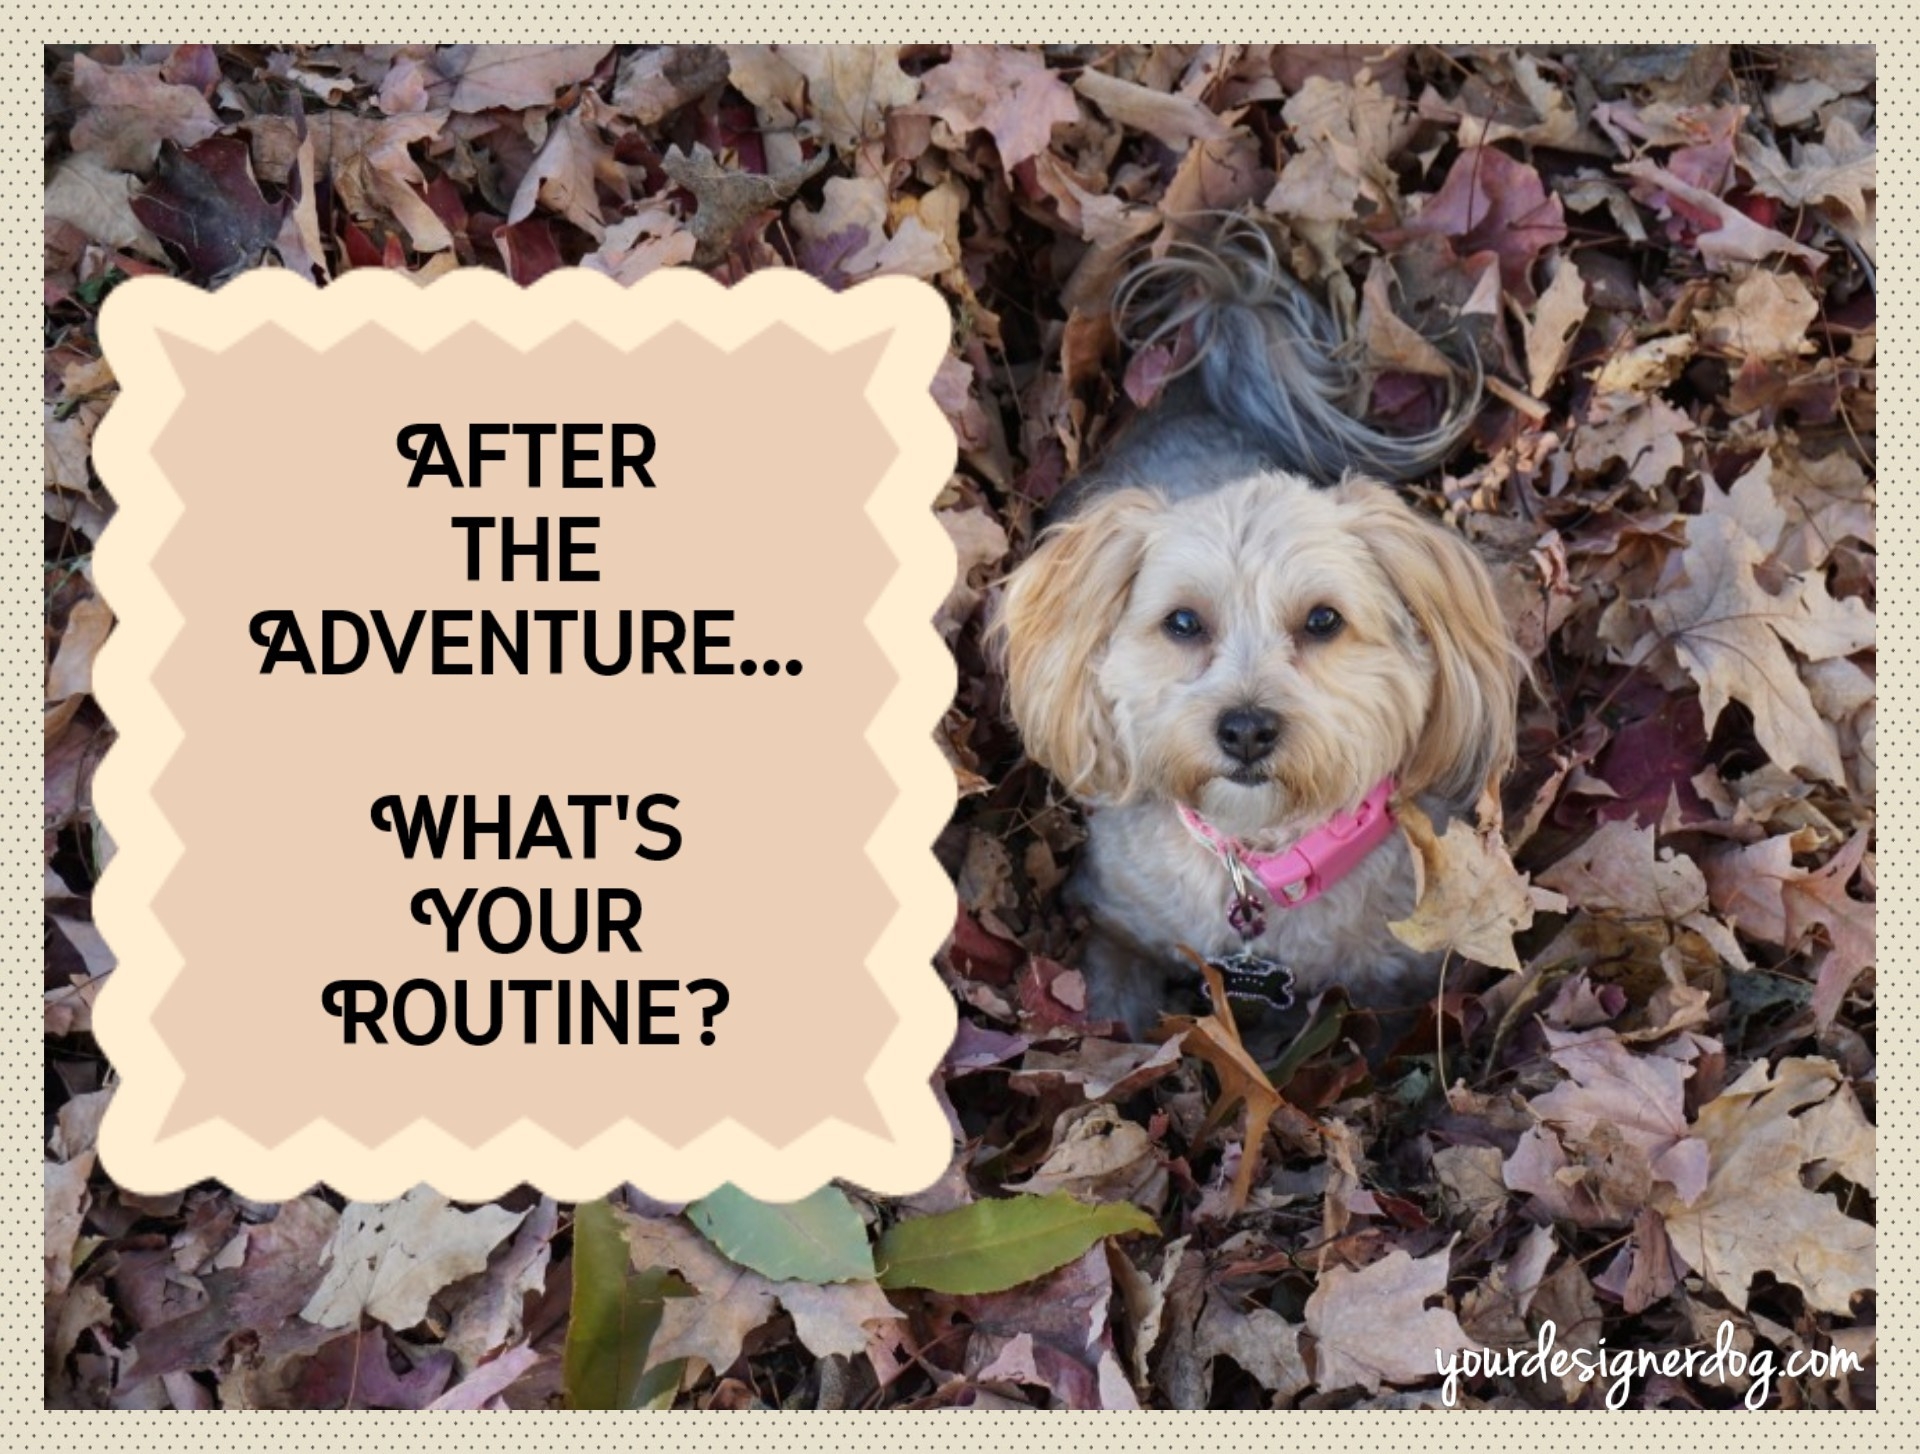 dogs, designer dogs, yorkipoo, yorkie poo, leaves, fall, adventure, routine